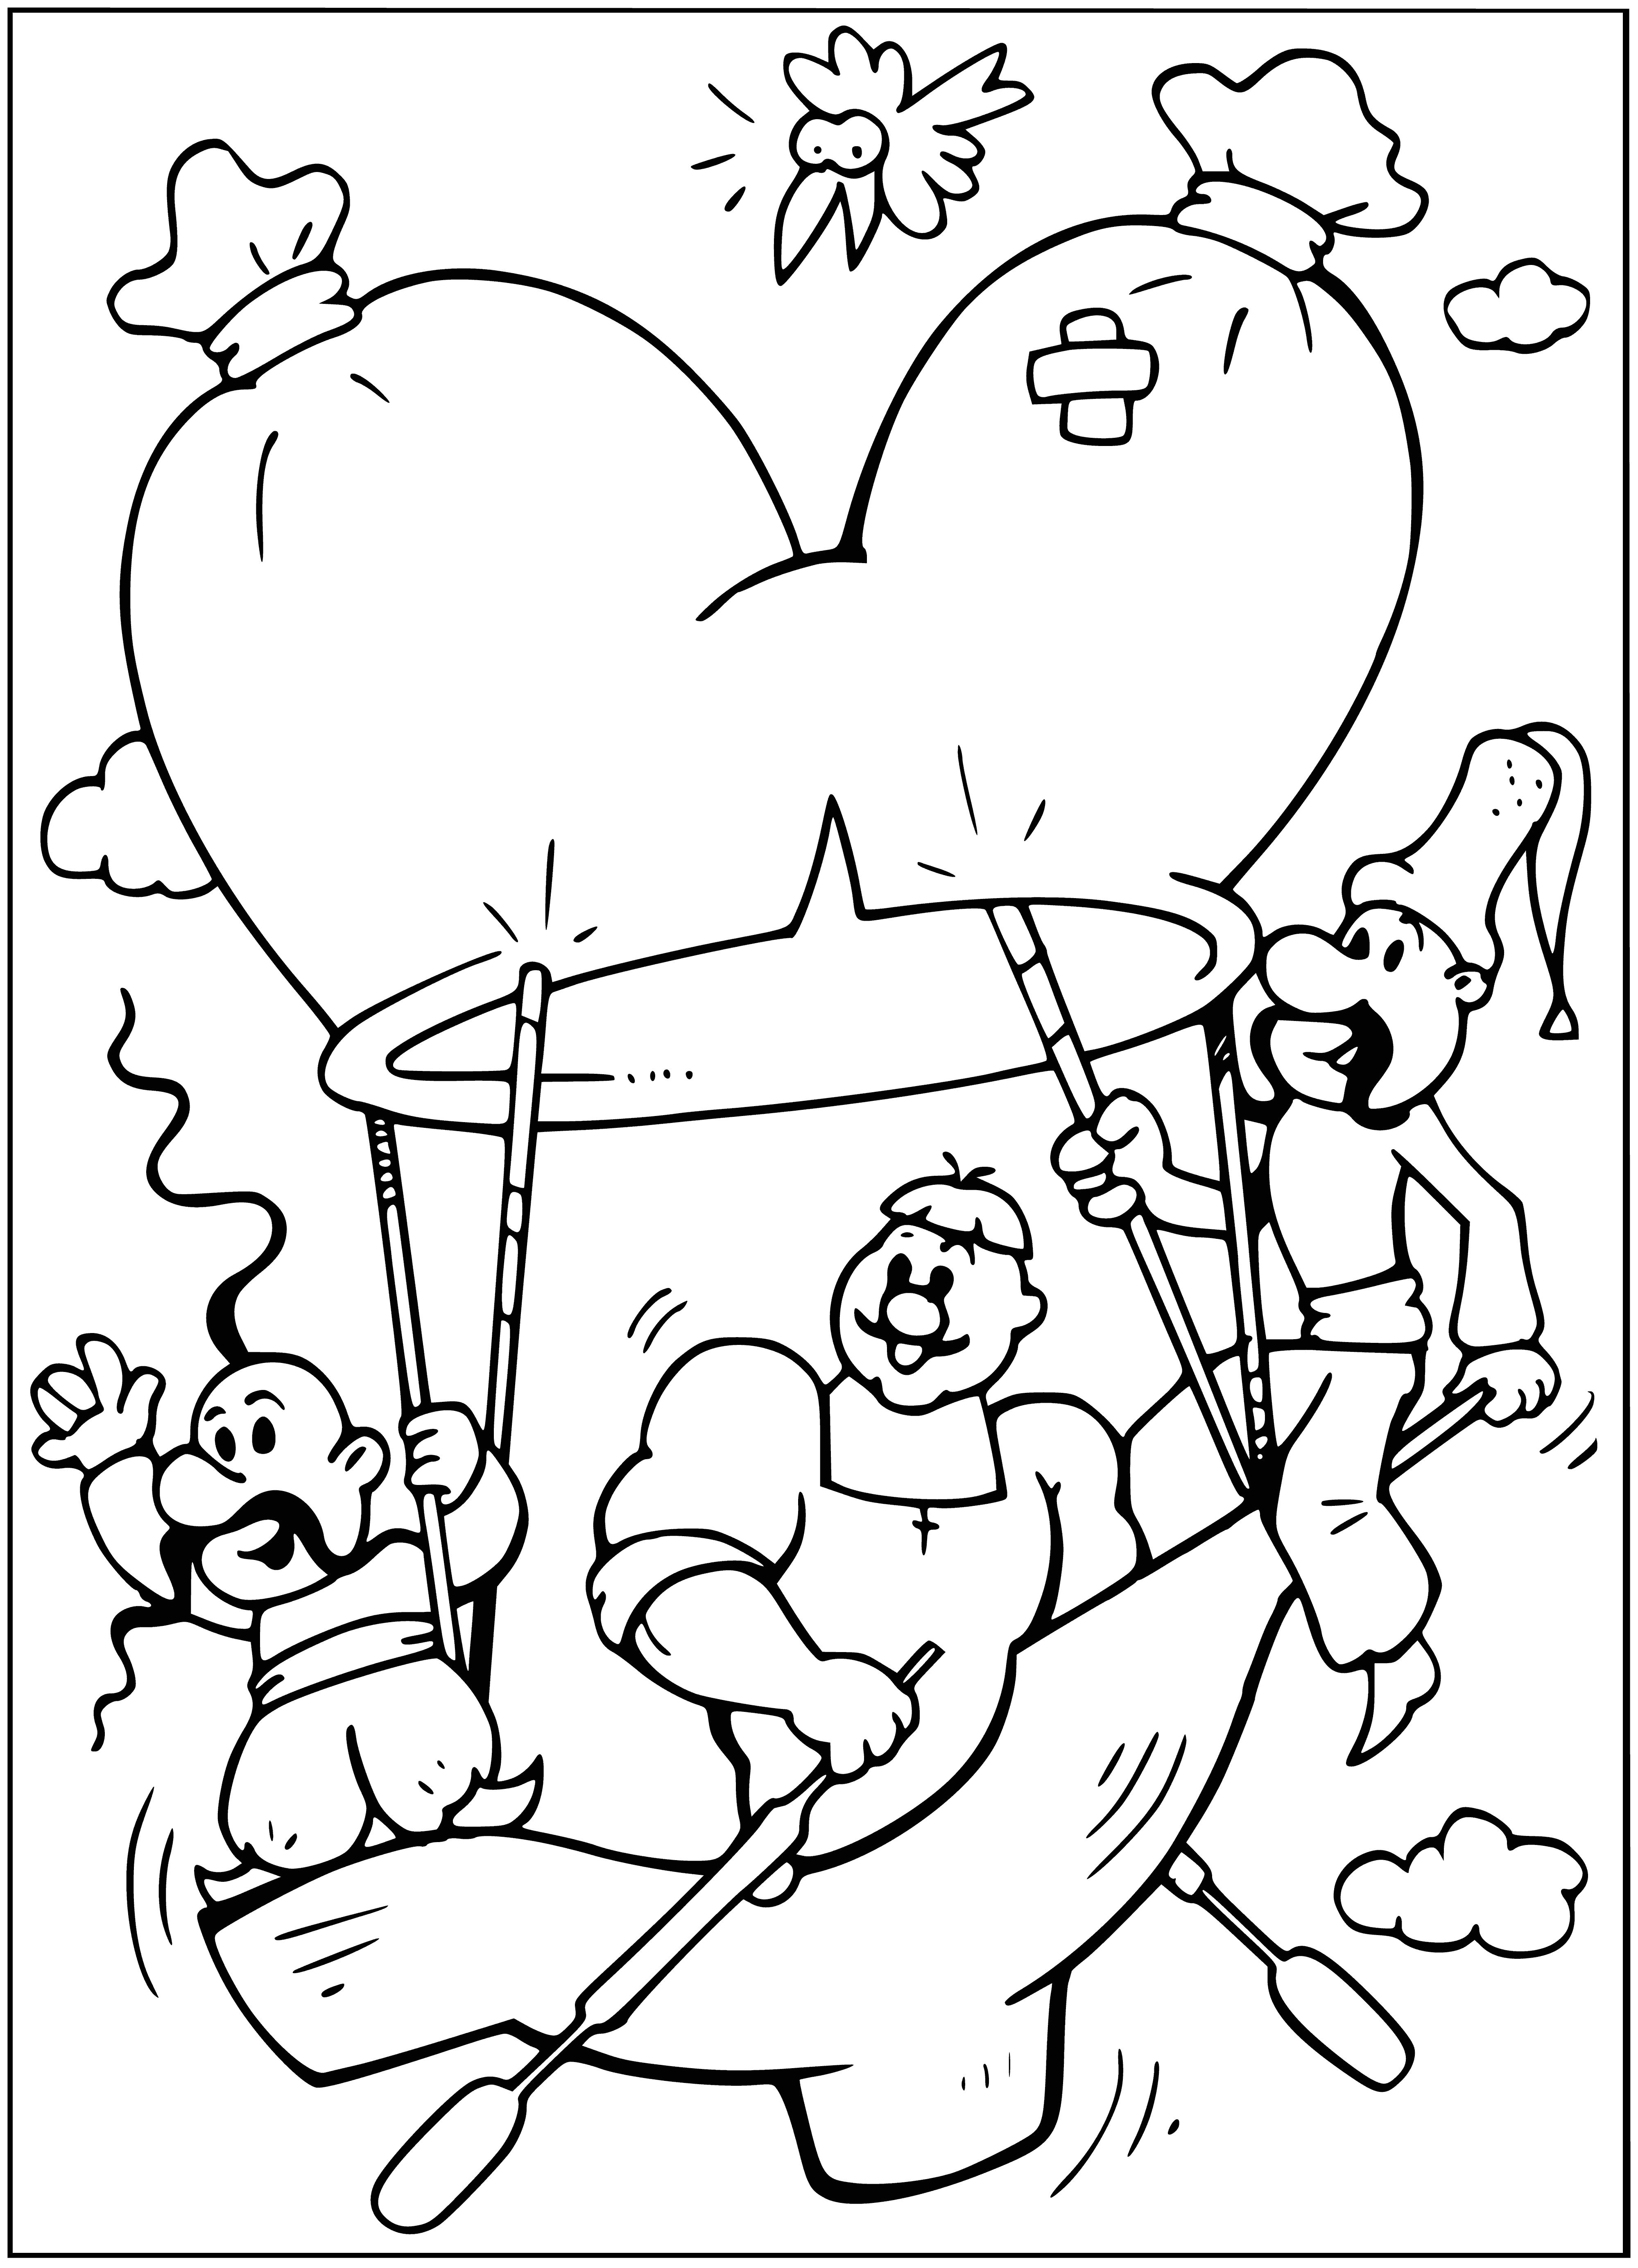 coloring page: Cossacks are a people of unique culture & traditions known for skillful horsemanship & fighting in Russia & Ukraine's steppes.